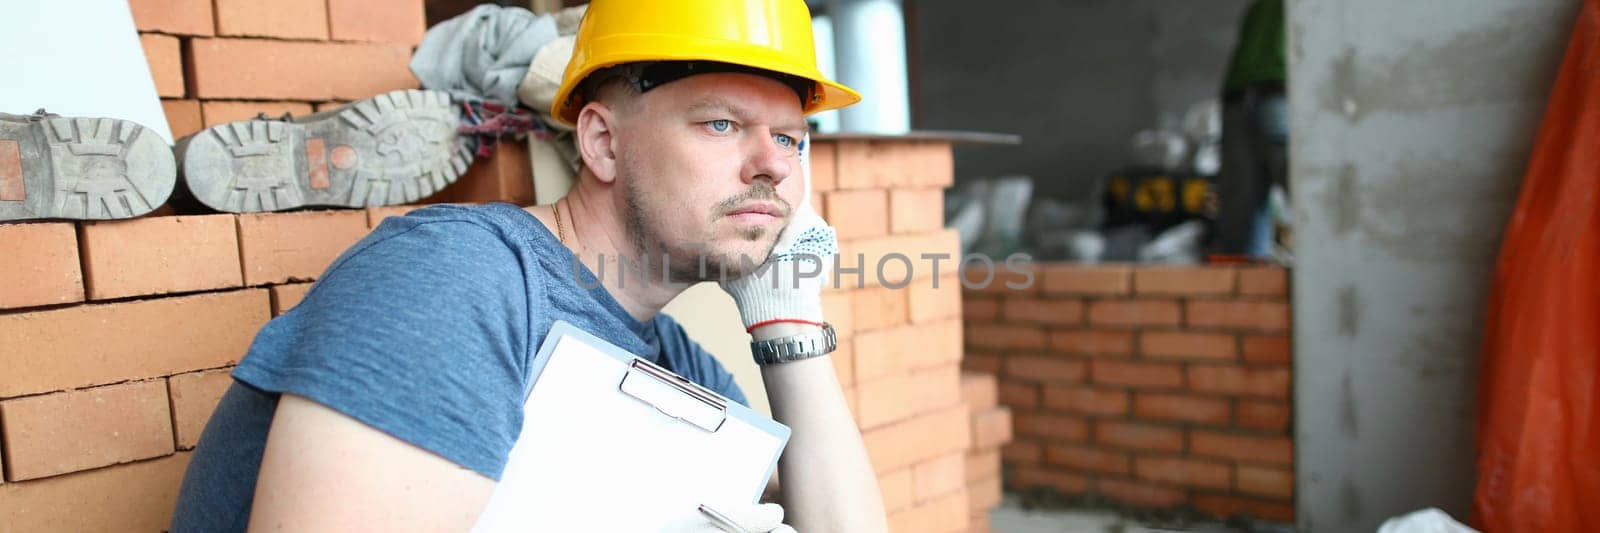 Thoughtful sad builder holding clipboard and looking into distance by kuprevich